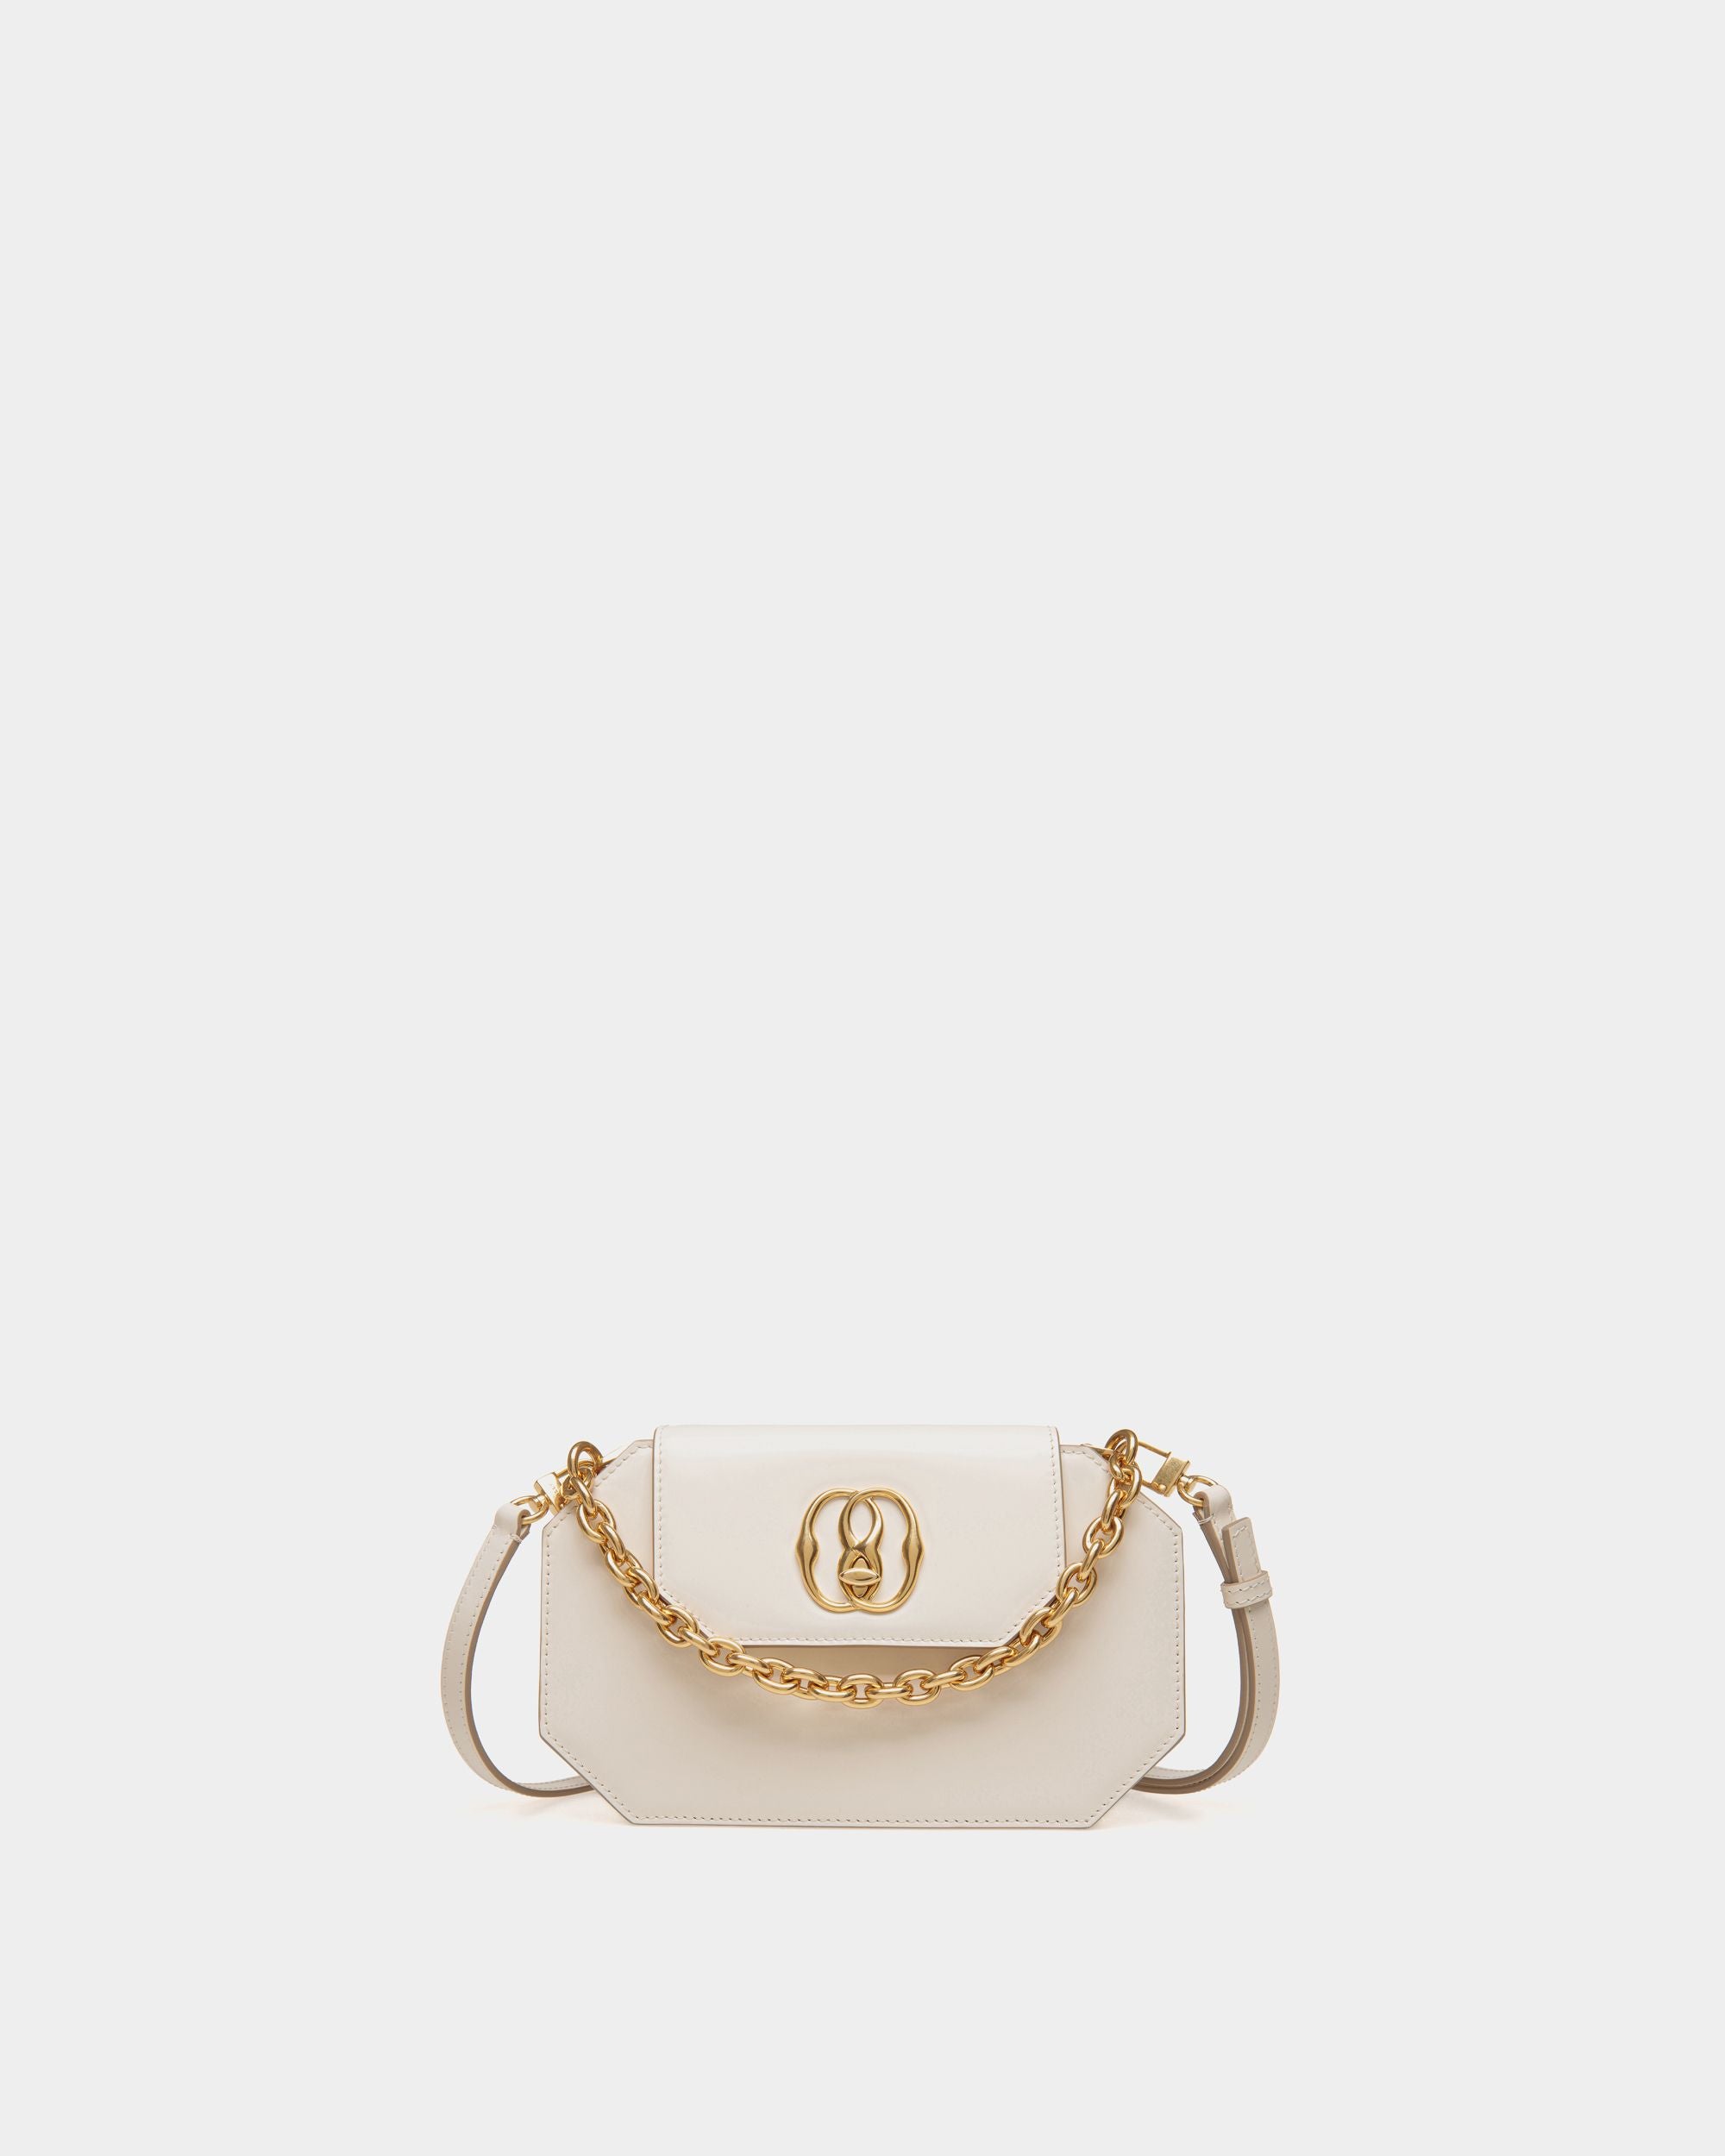 Women's Emblem Mini Bag in White Brushed Leather | Bally | Still Life Front